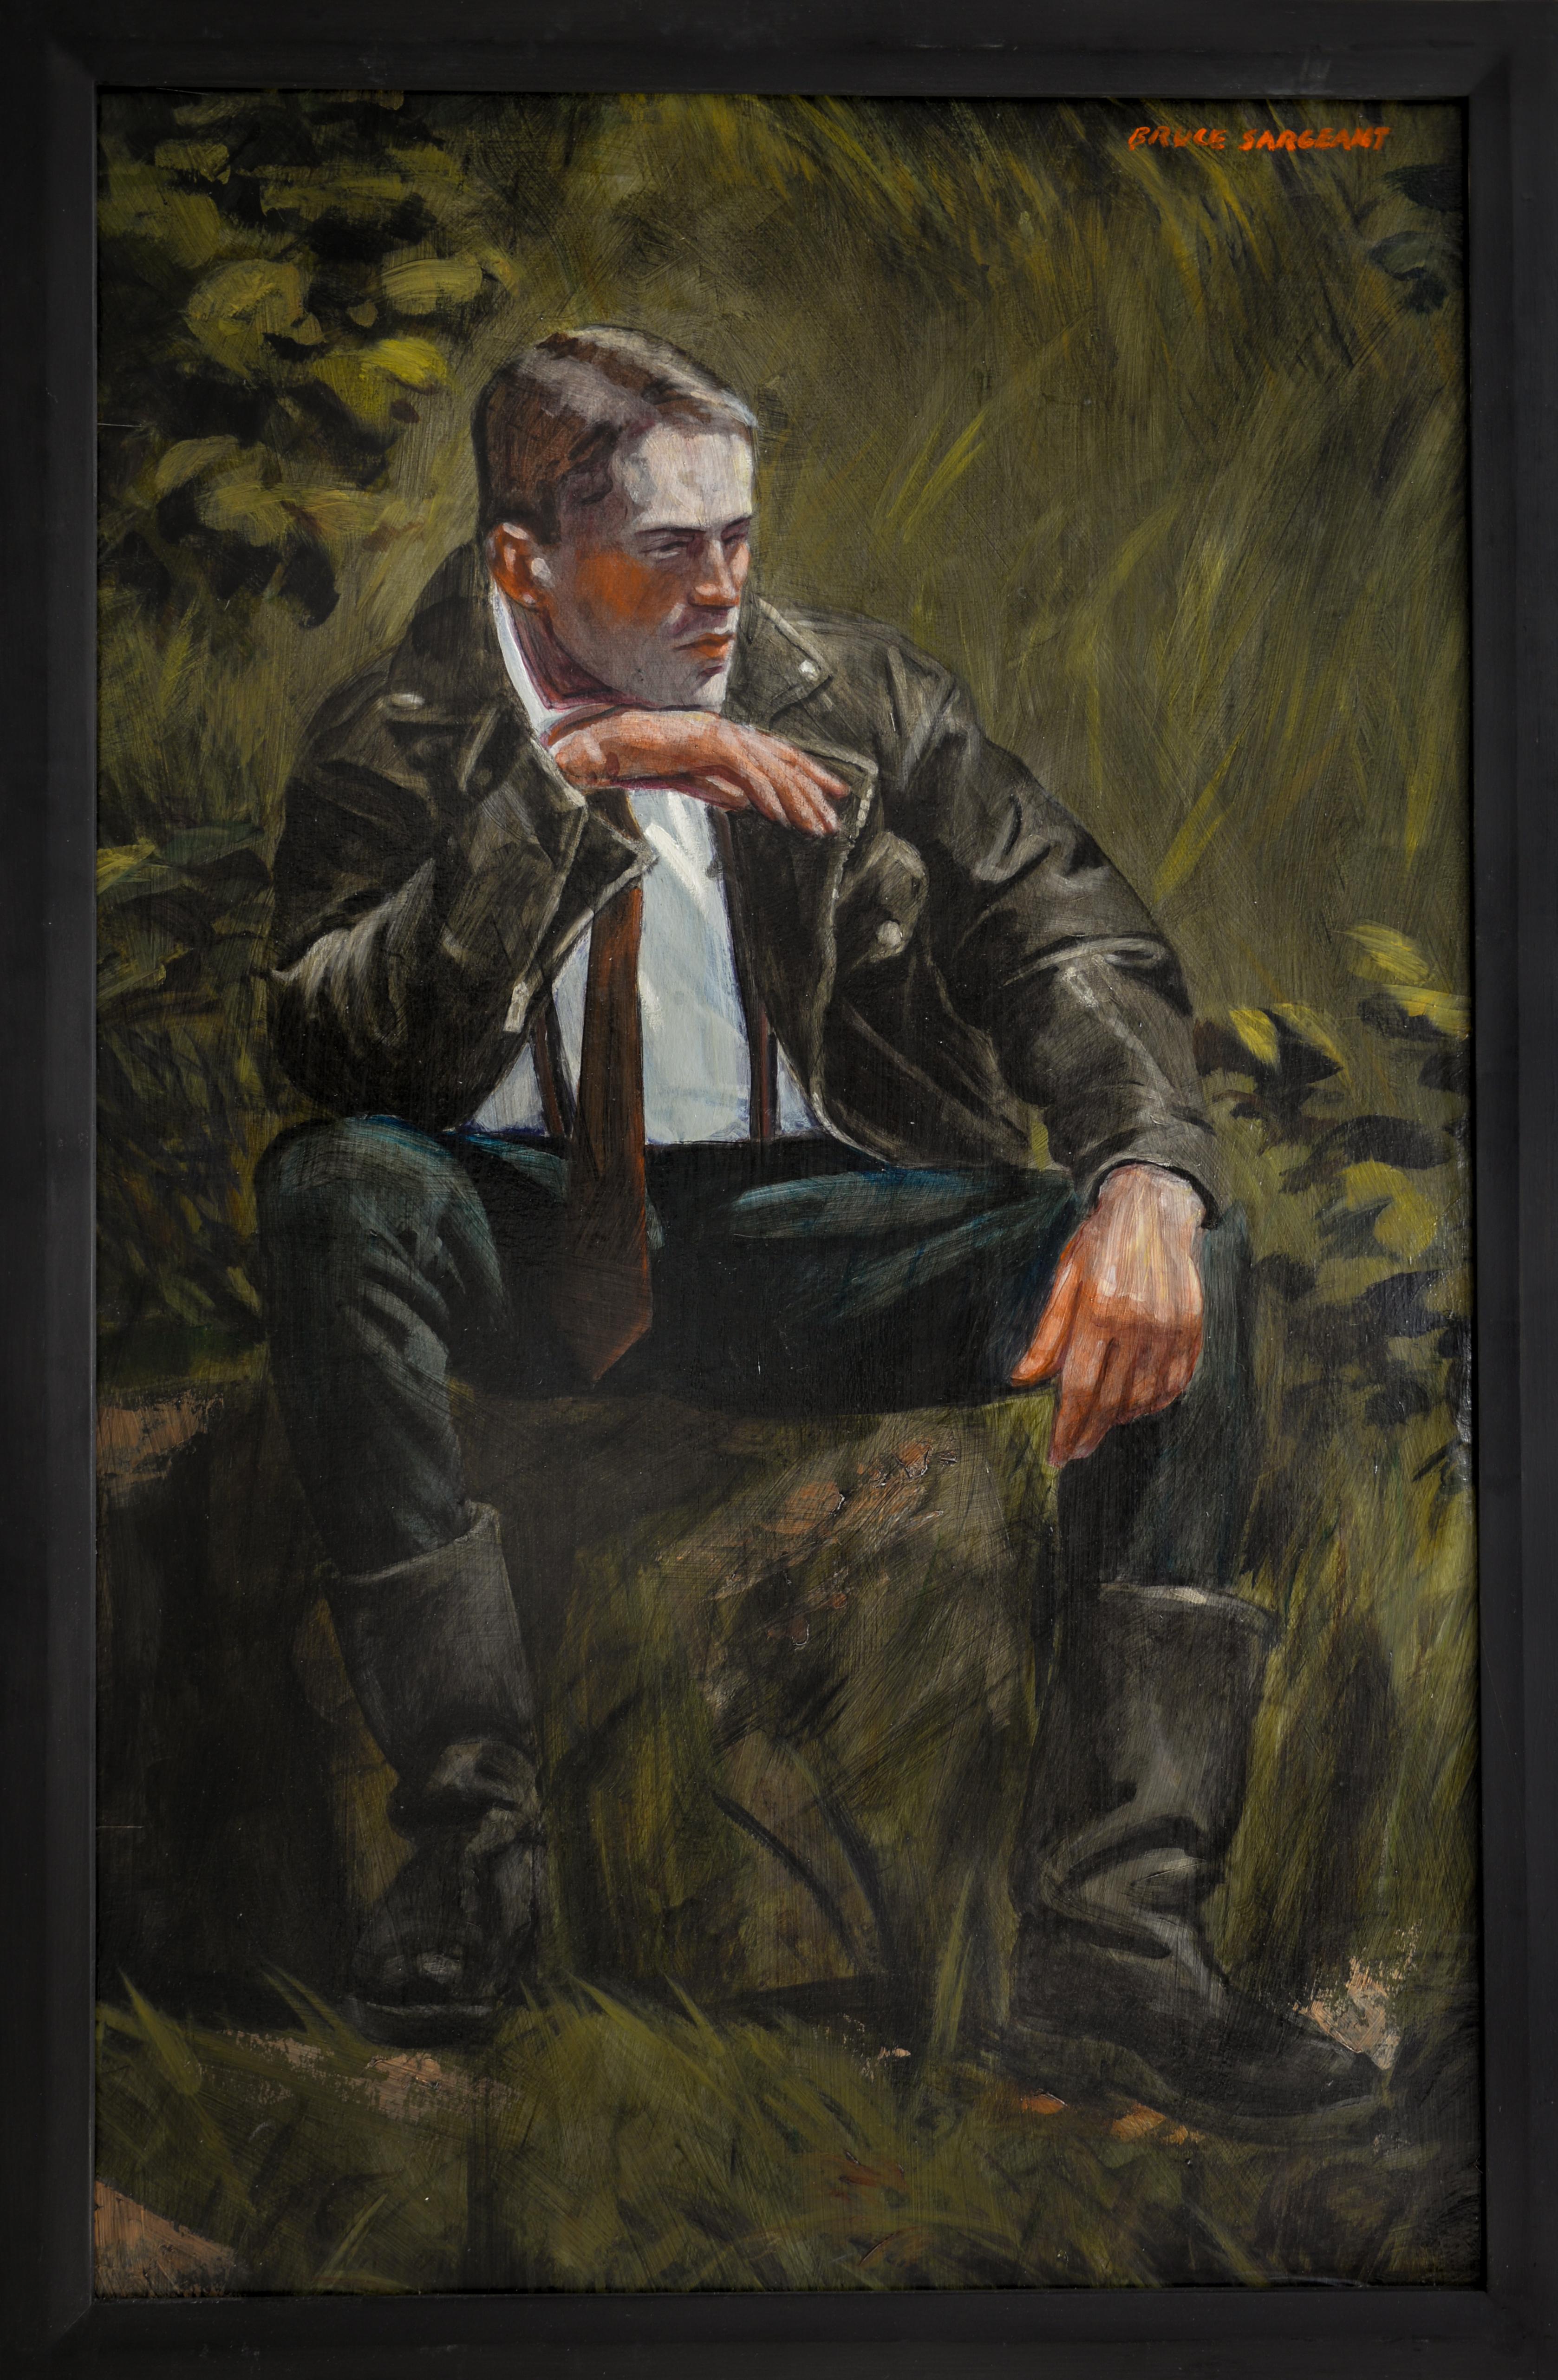 [Bruce Sargeant (1898-1938)] Black Leather Jacket and Black Leather Boots